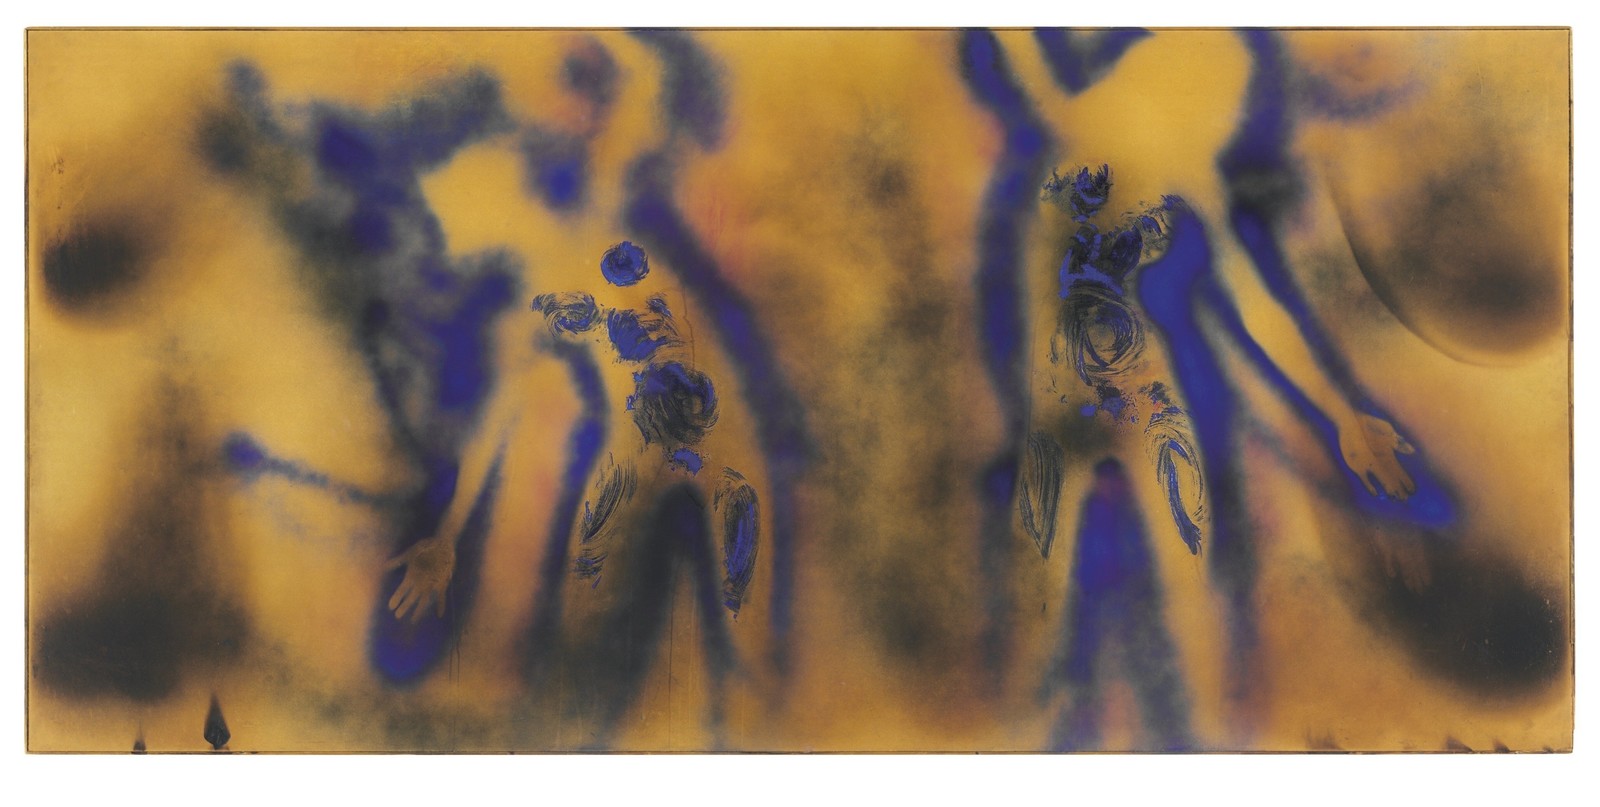 Yves Klein. FC1. 1962. Dry pigment and synthetic resin on panel. 141 х 299.5 х 3 cm. Private collection